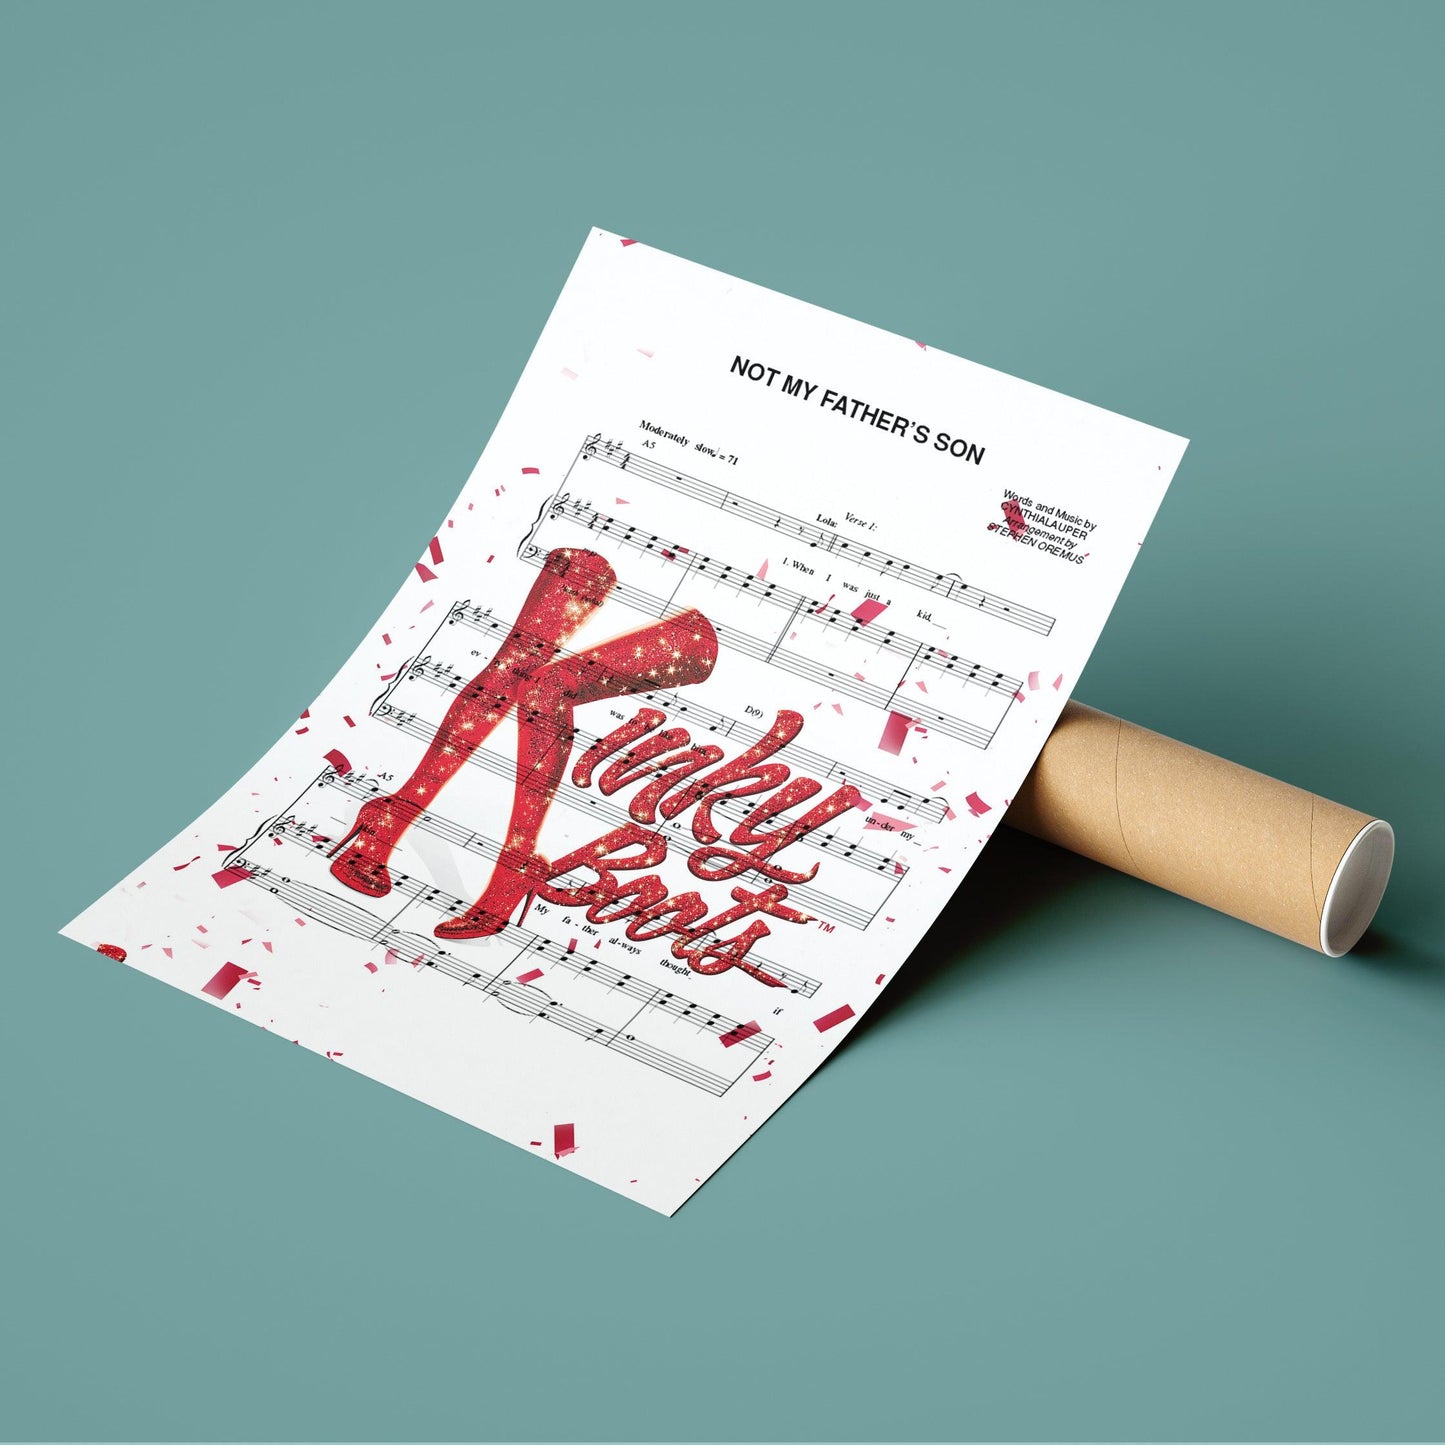 Kinky Boots - Not My Father's Son Poster